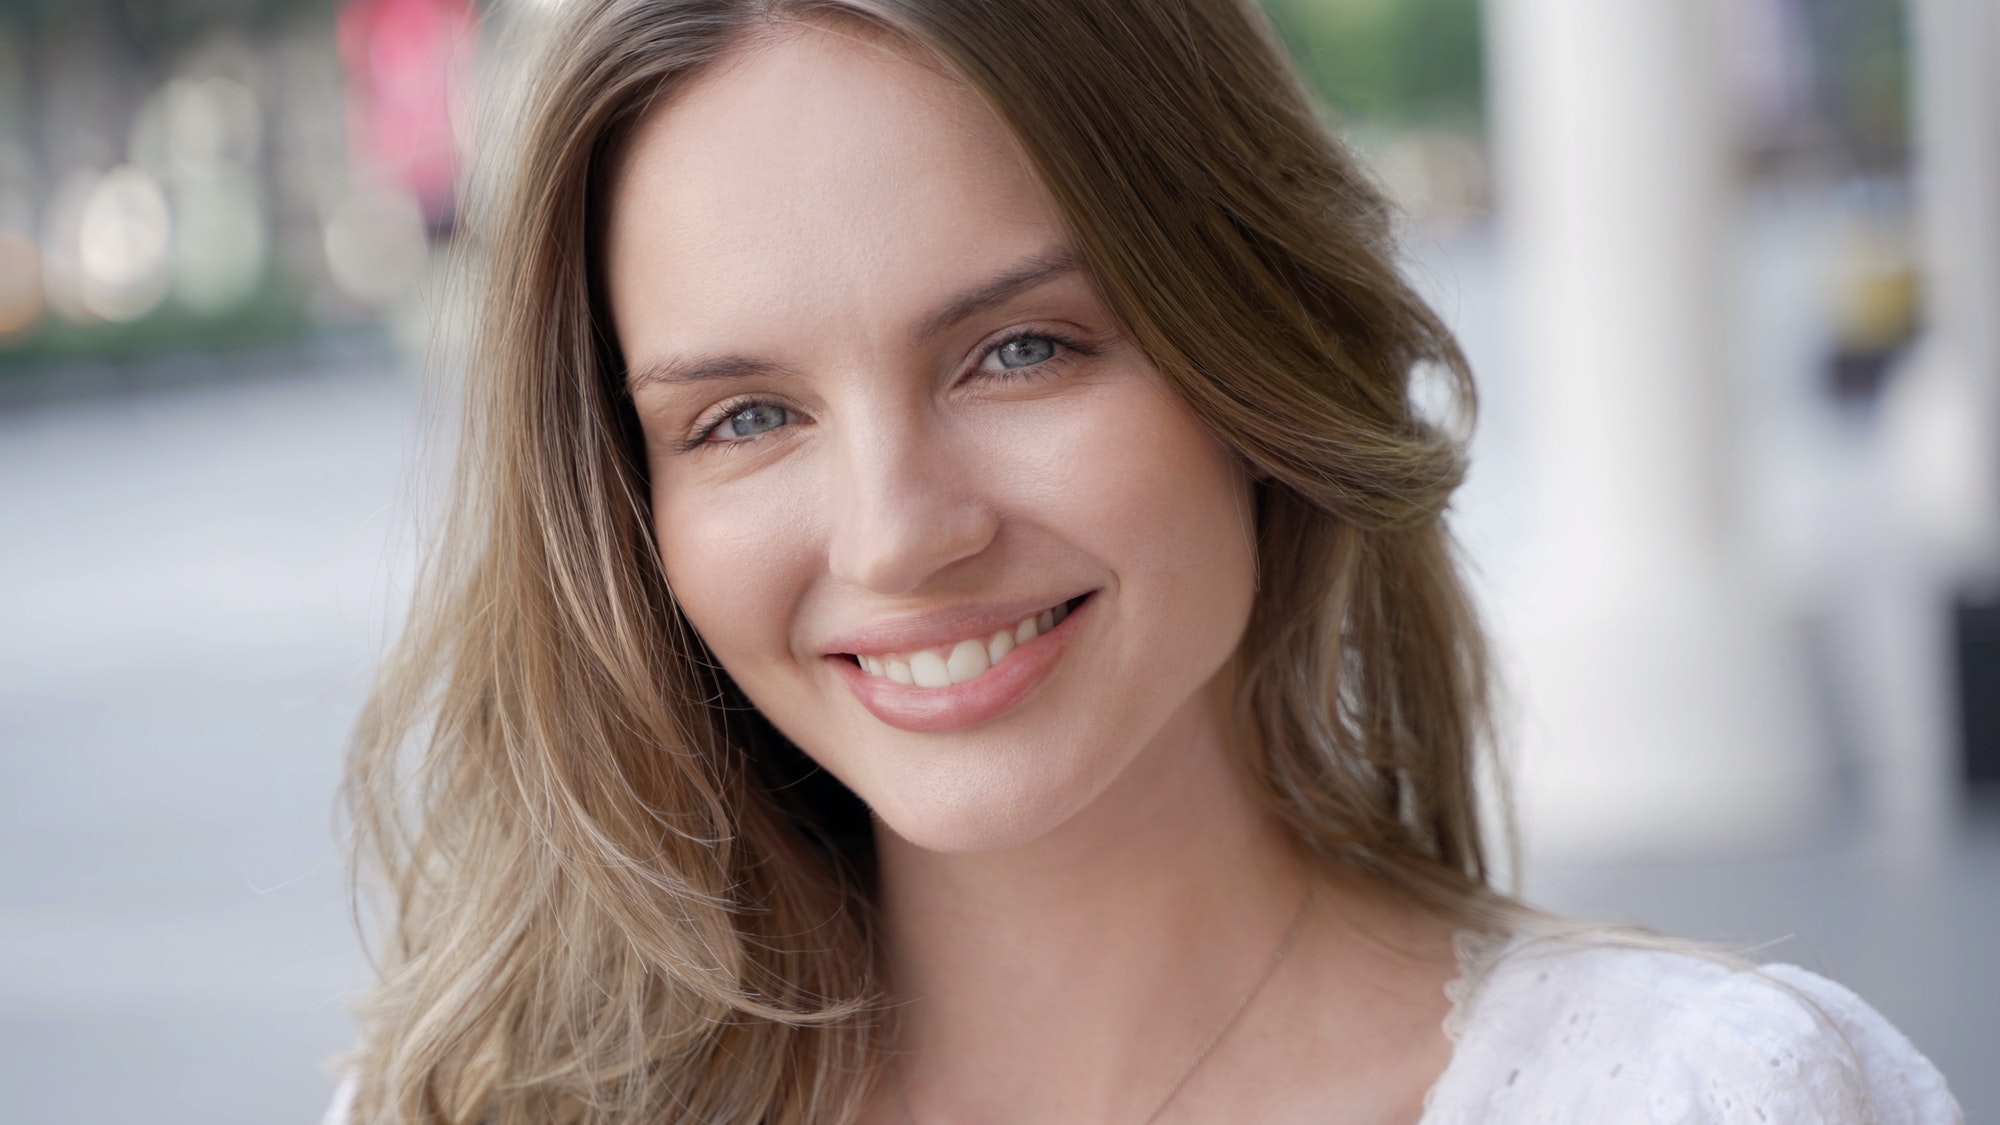 A smiling young adult with long hair in a headshot portrait